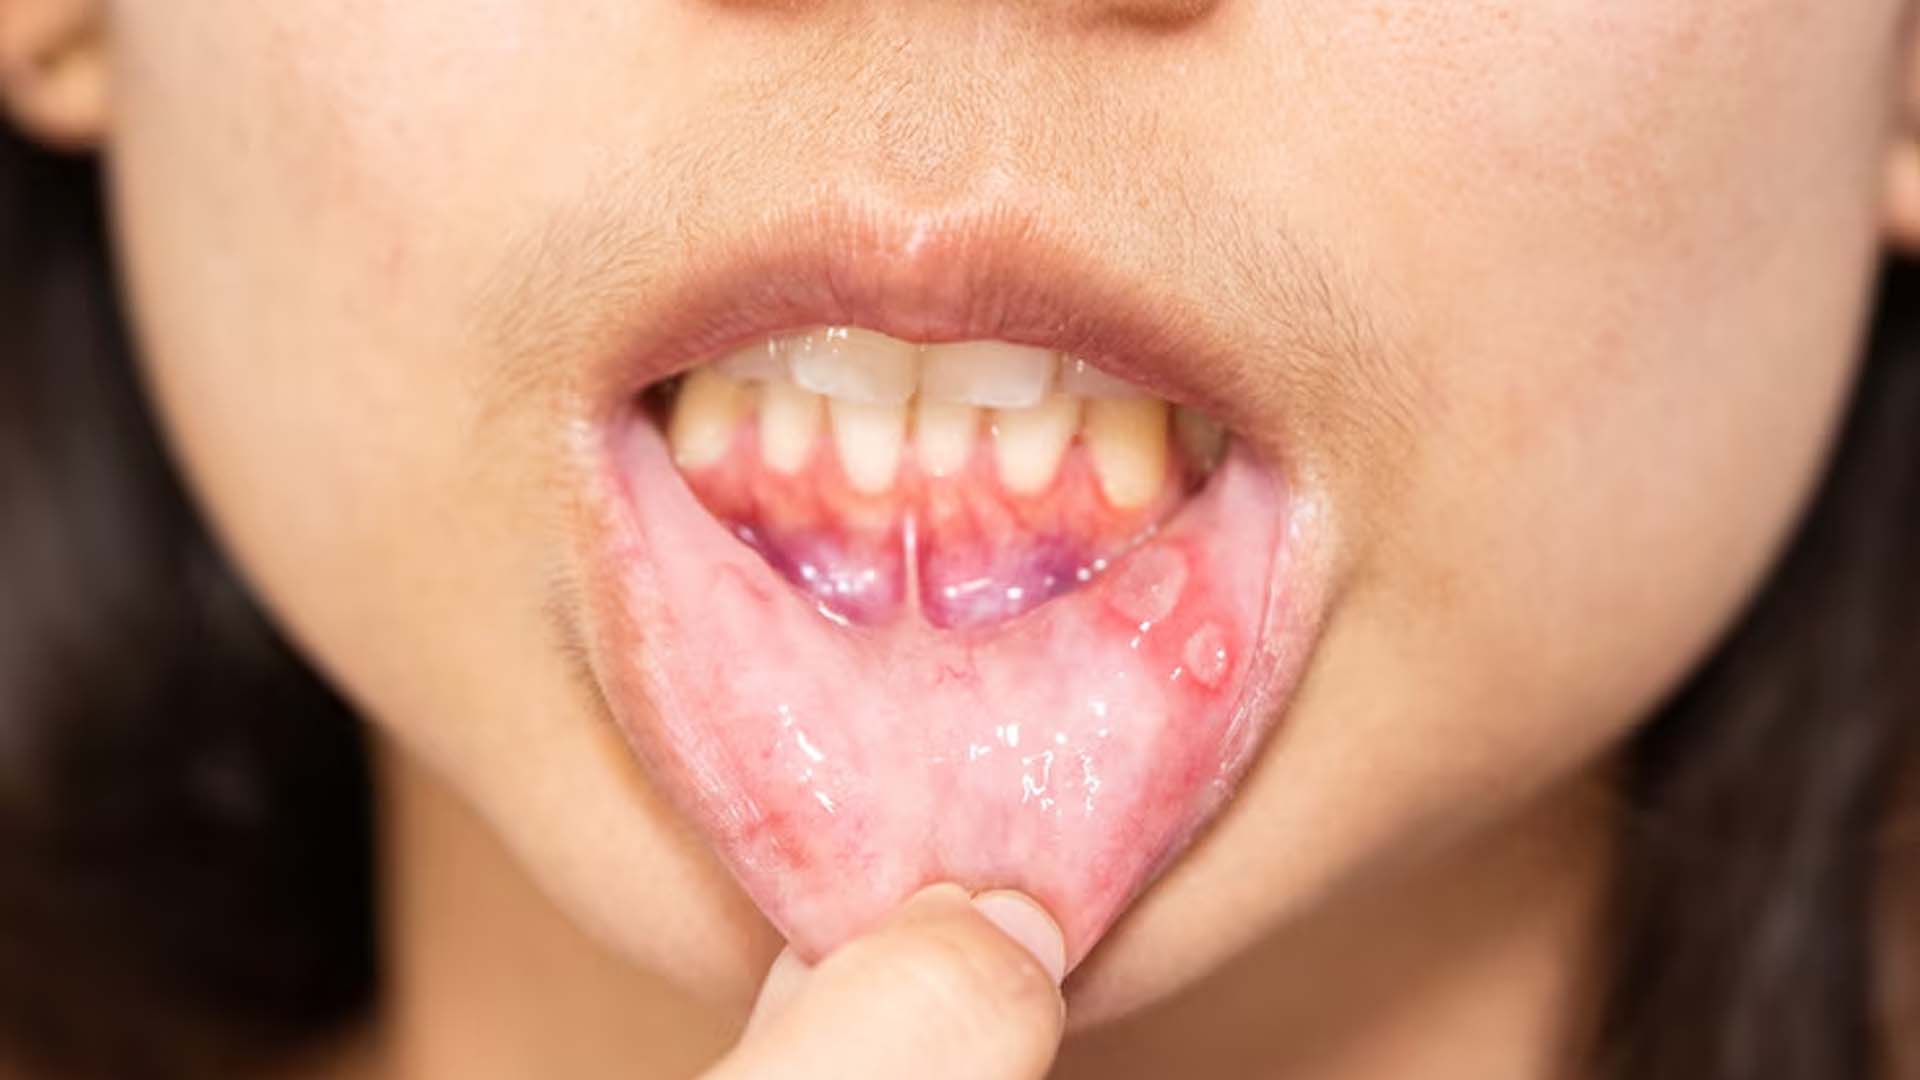 Canker sores or Aphthous ulcers